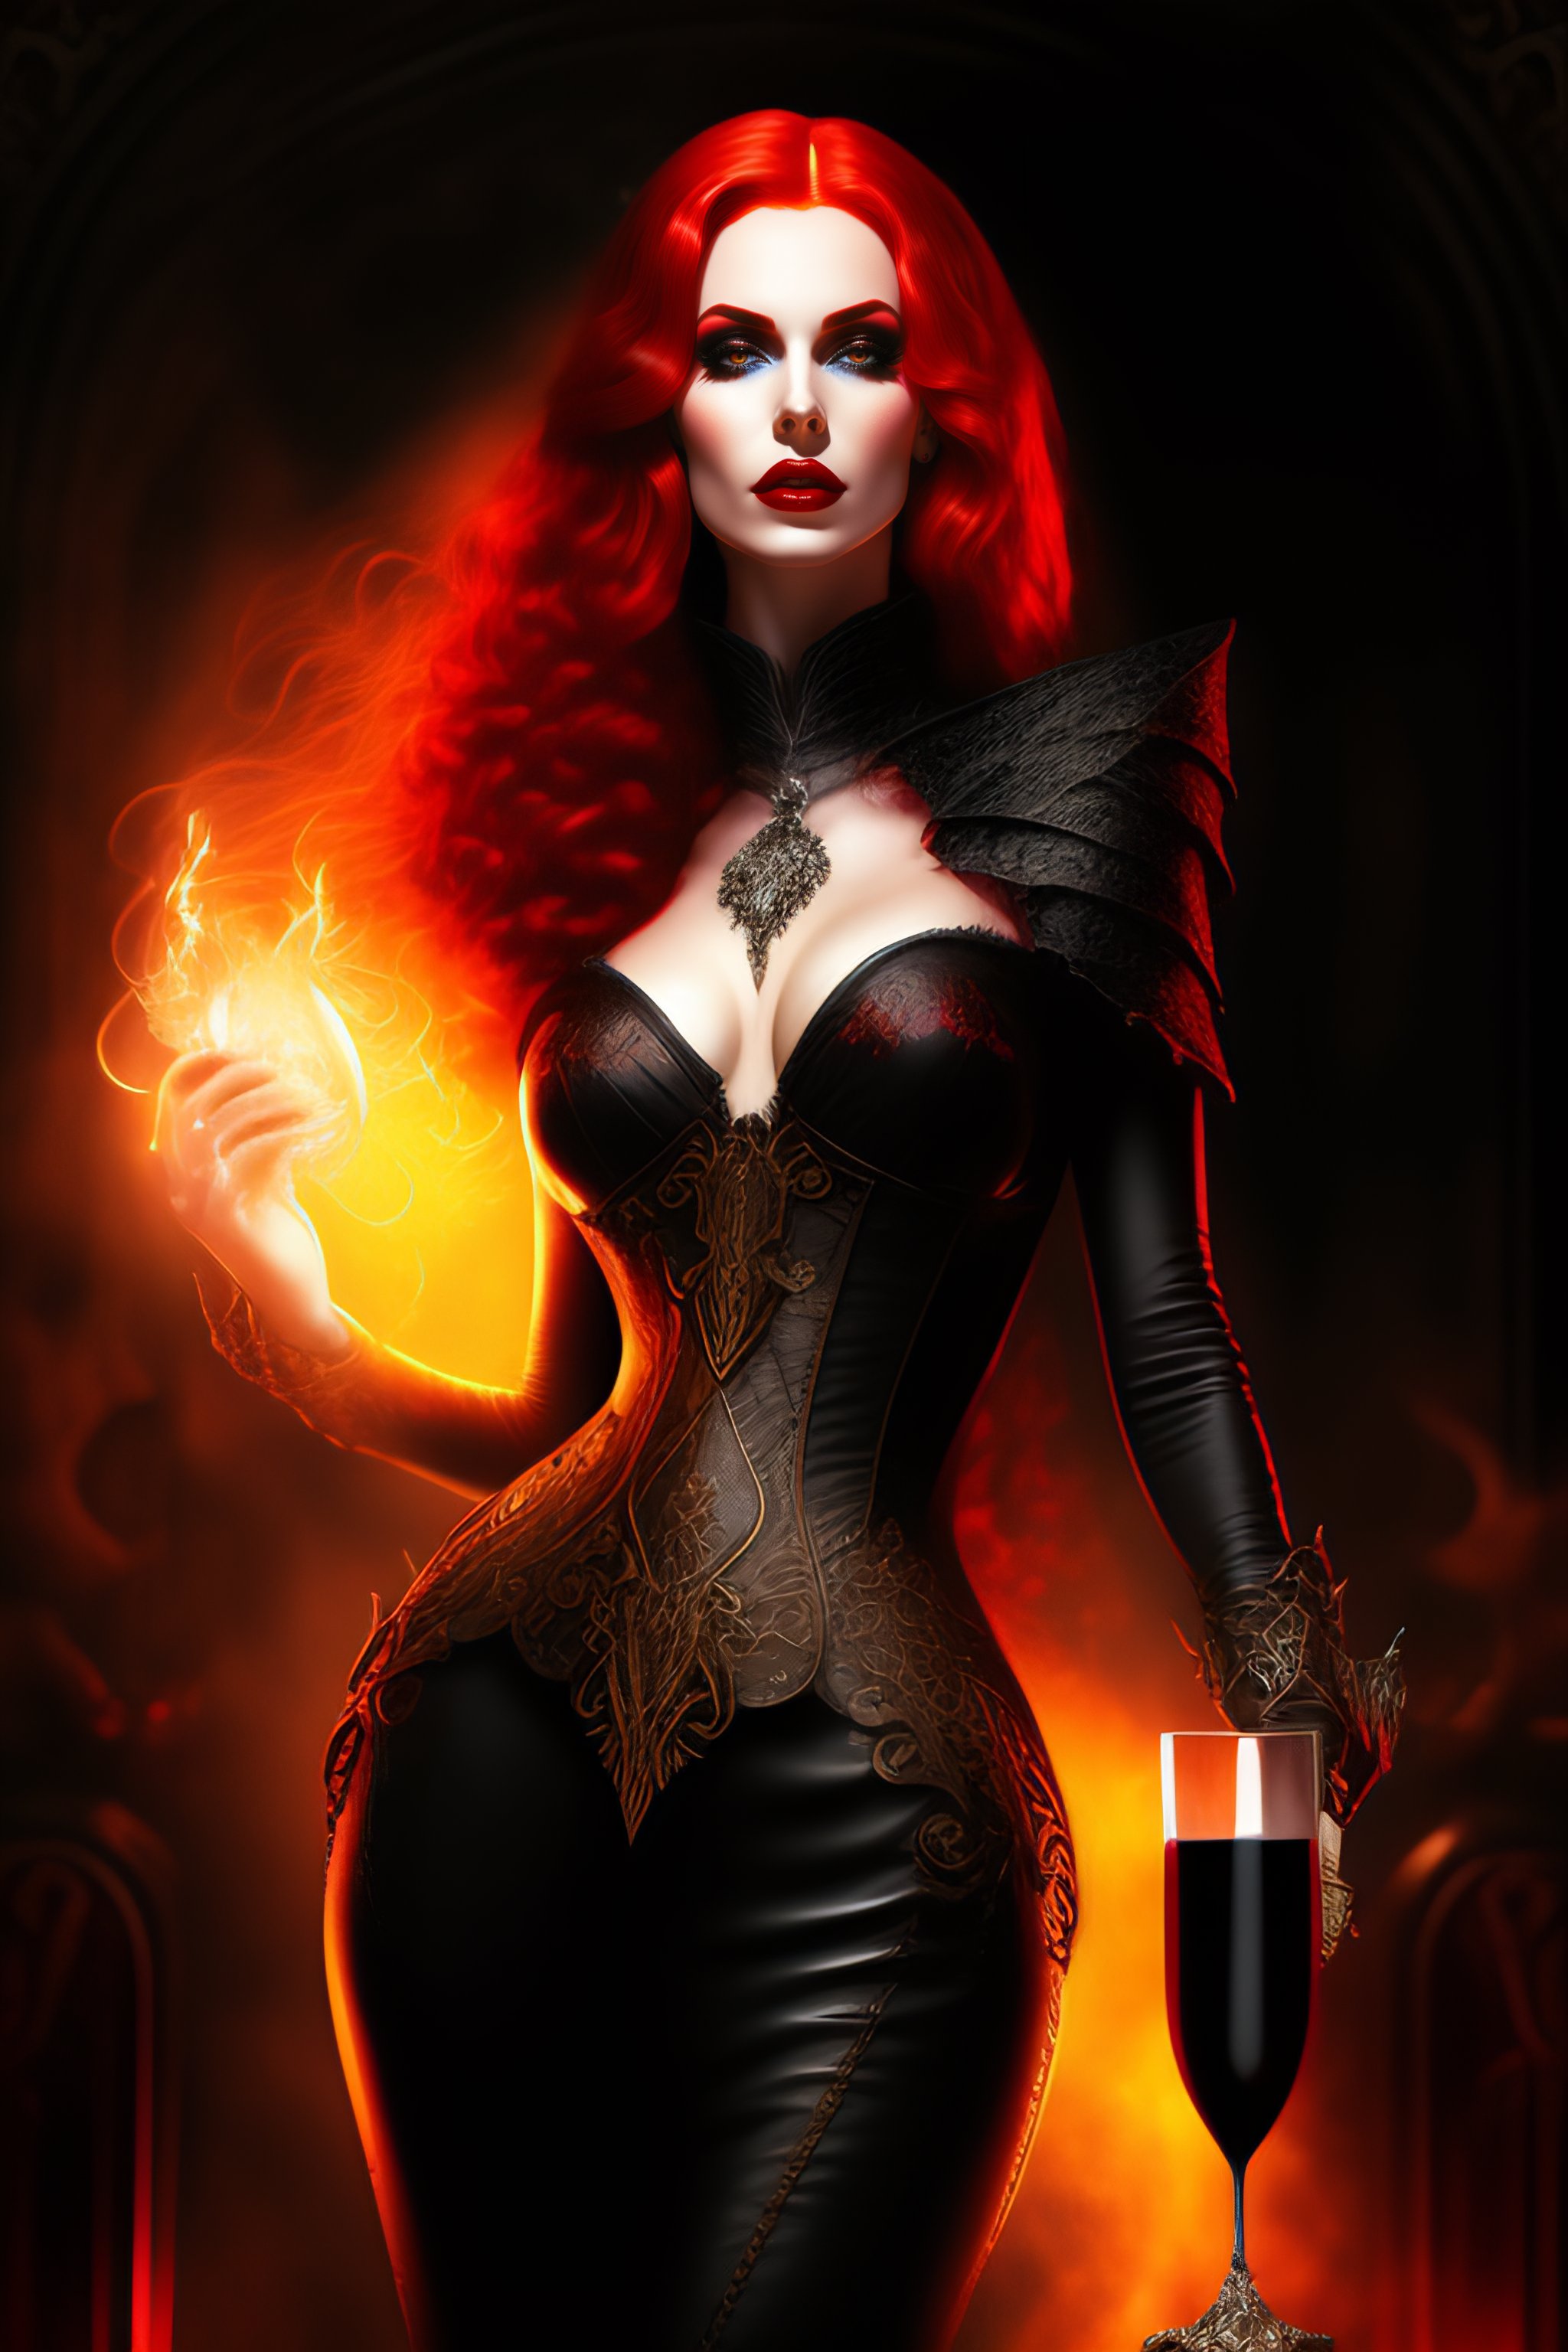 Lexica Female Redhead Vampire Full Body Cinematic Style Digital Art Render With Gothic Look